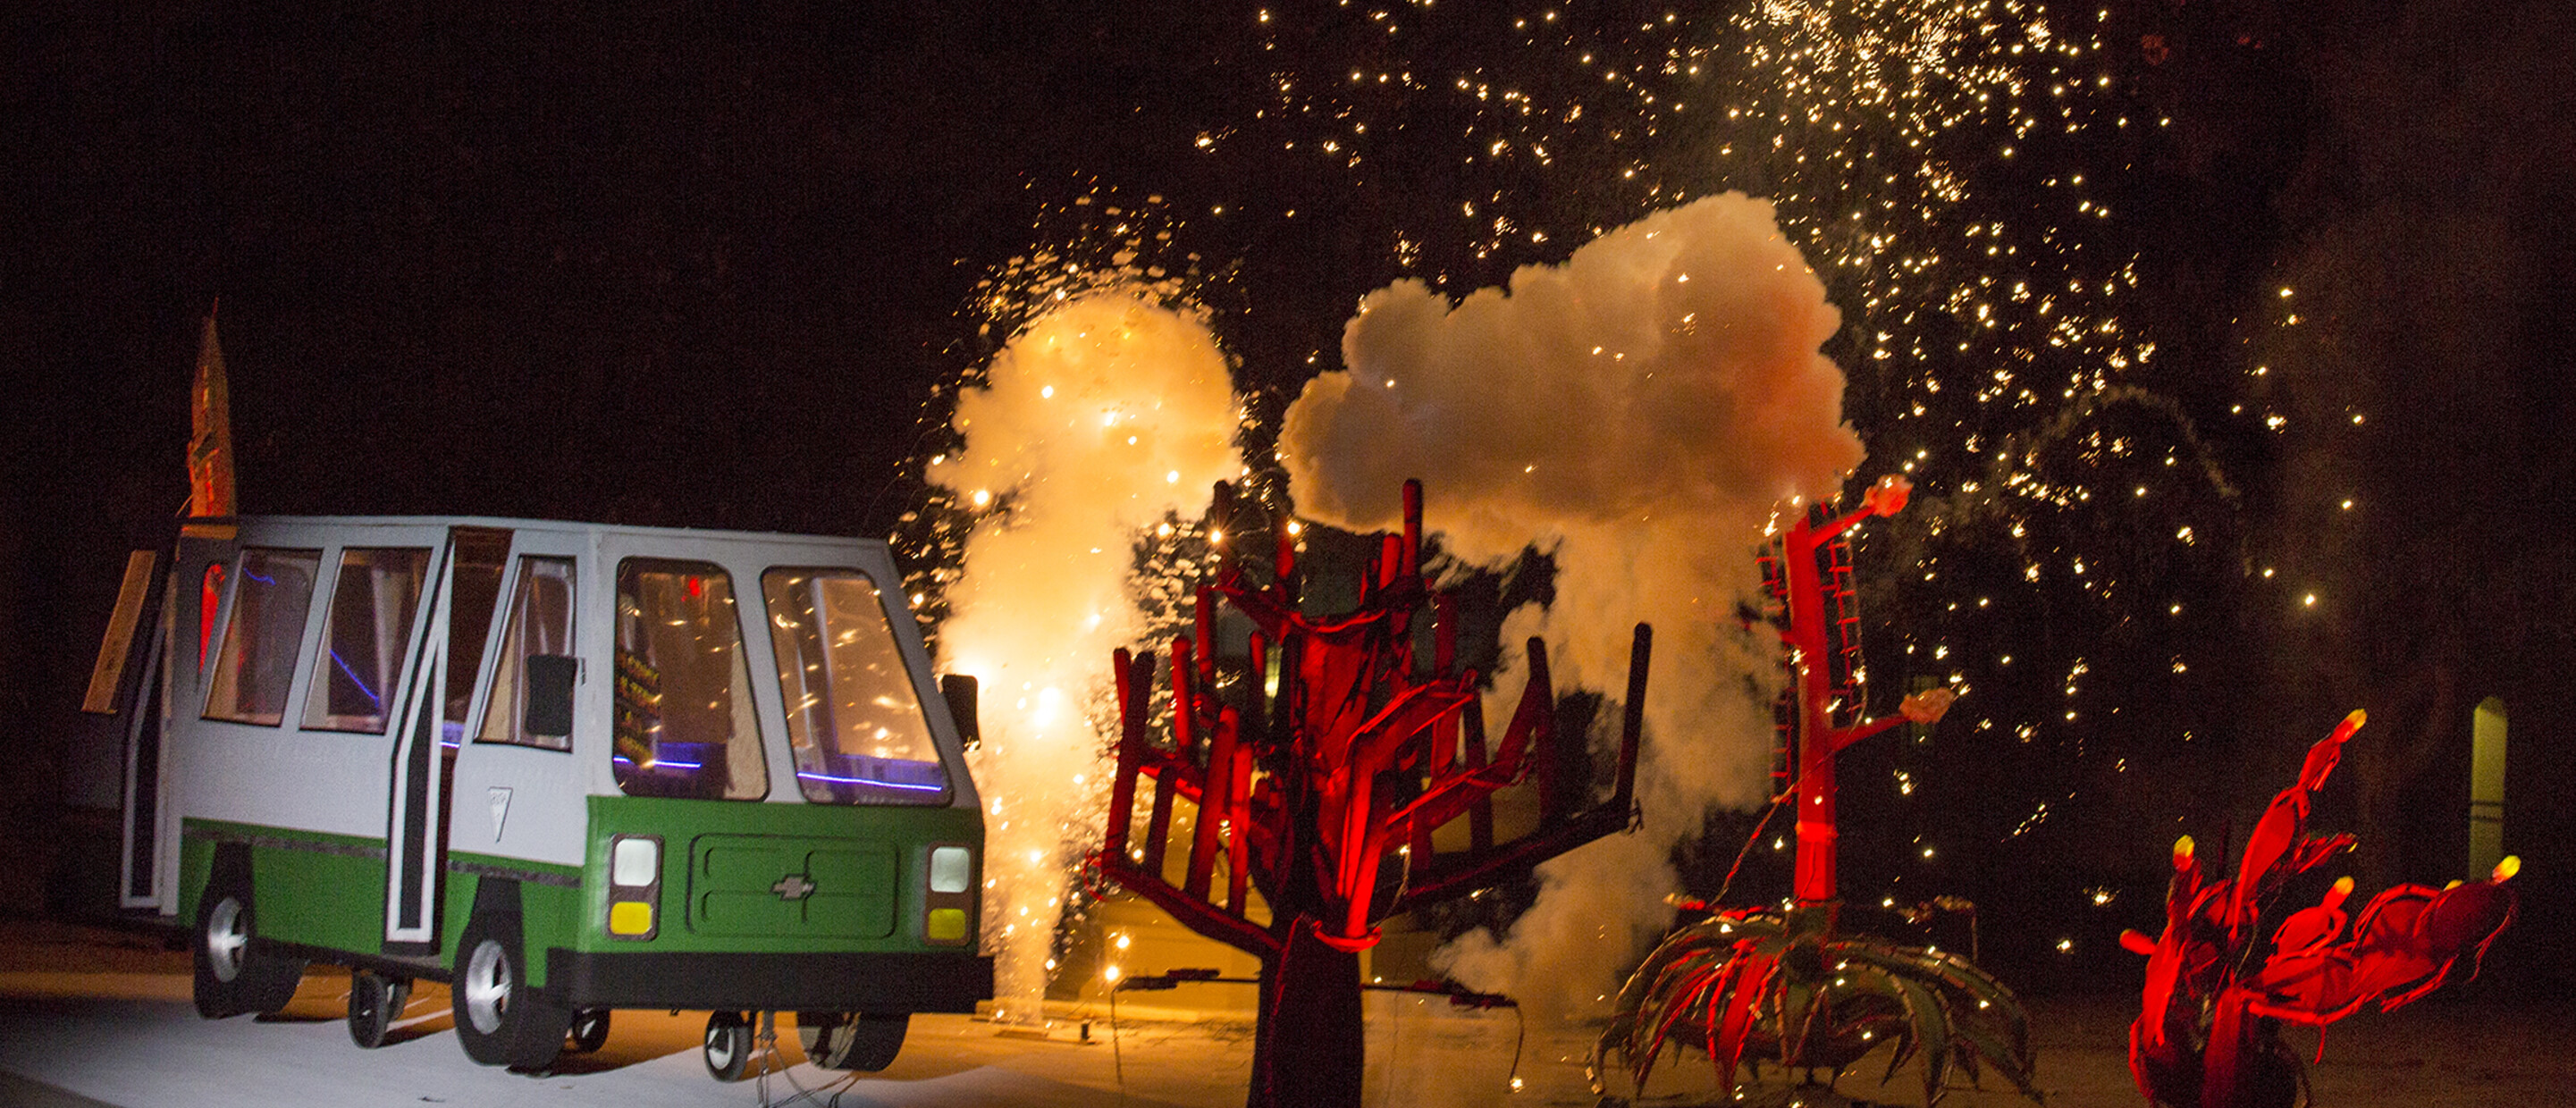 Papermaché microbus and cacti being blown up using pyrotechnics